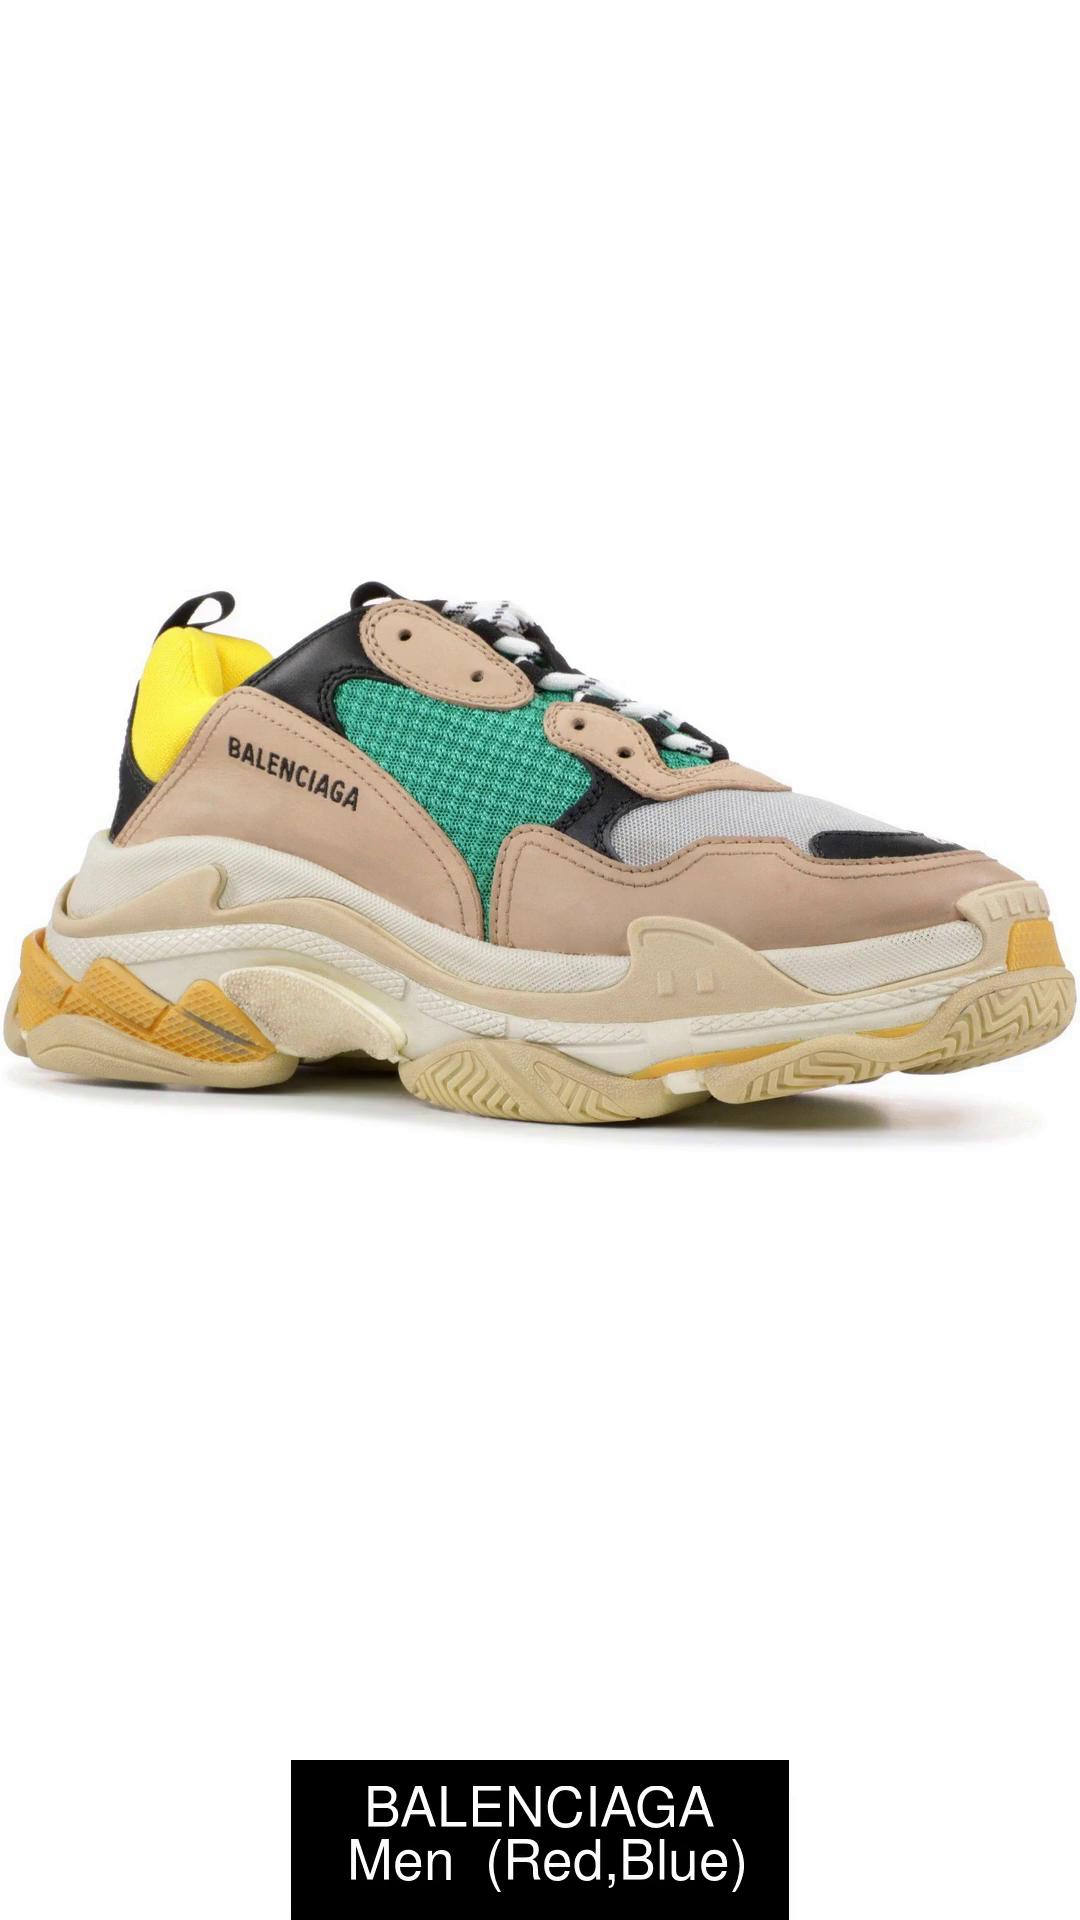 BALENCIAGA Men's Triple S 2019 Mesh & Leather Green Running Shoes For - Buy BALENCIAGA Triple S 2019 Mesh & Leather Sneakers, Green Shoes For Men Online at